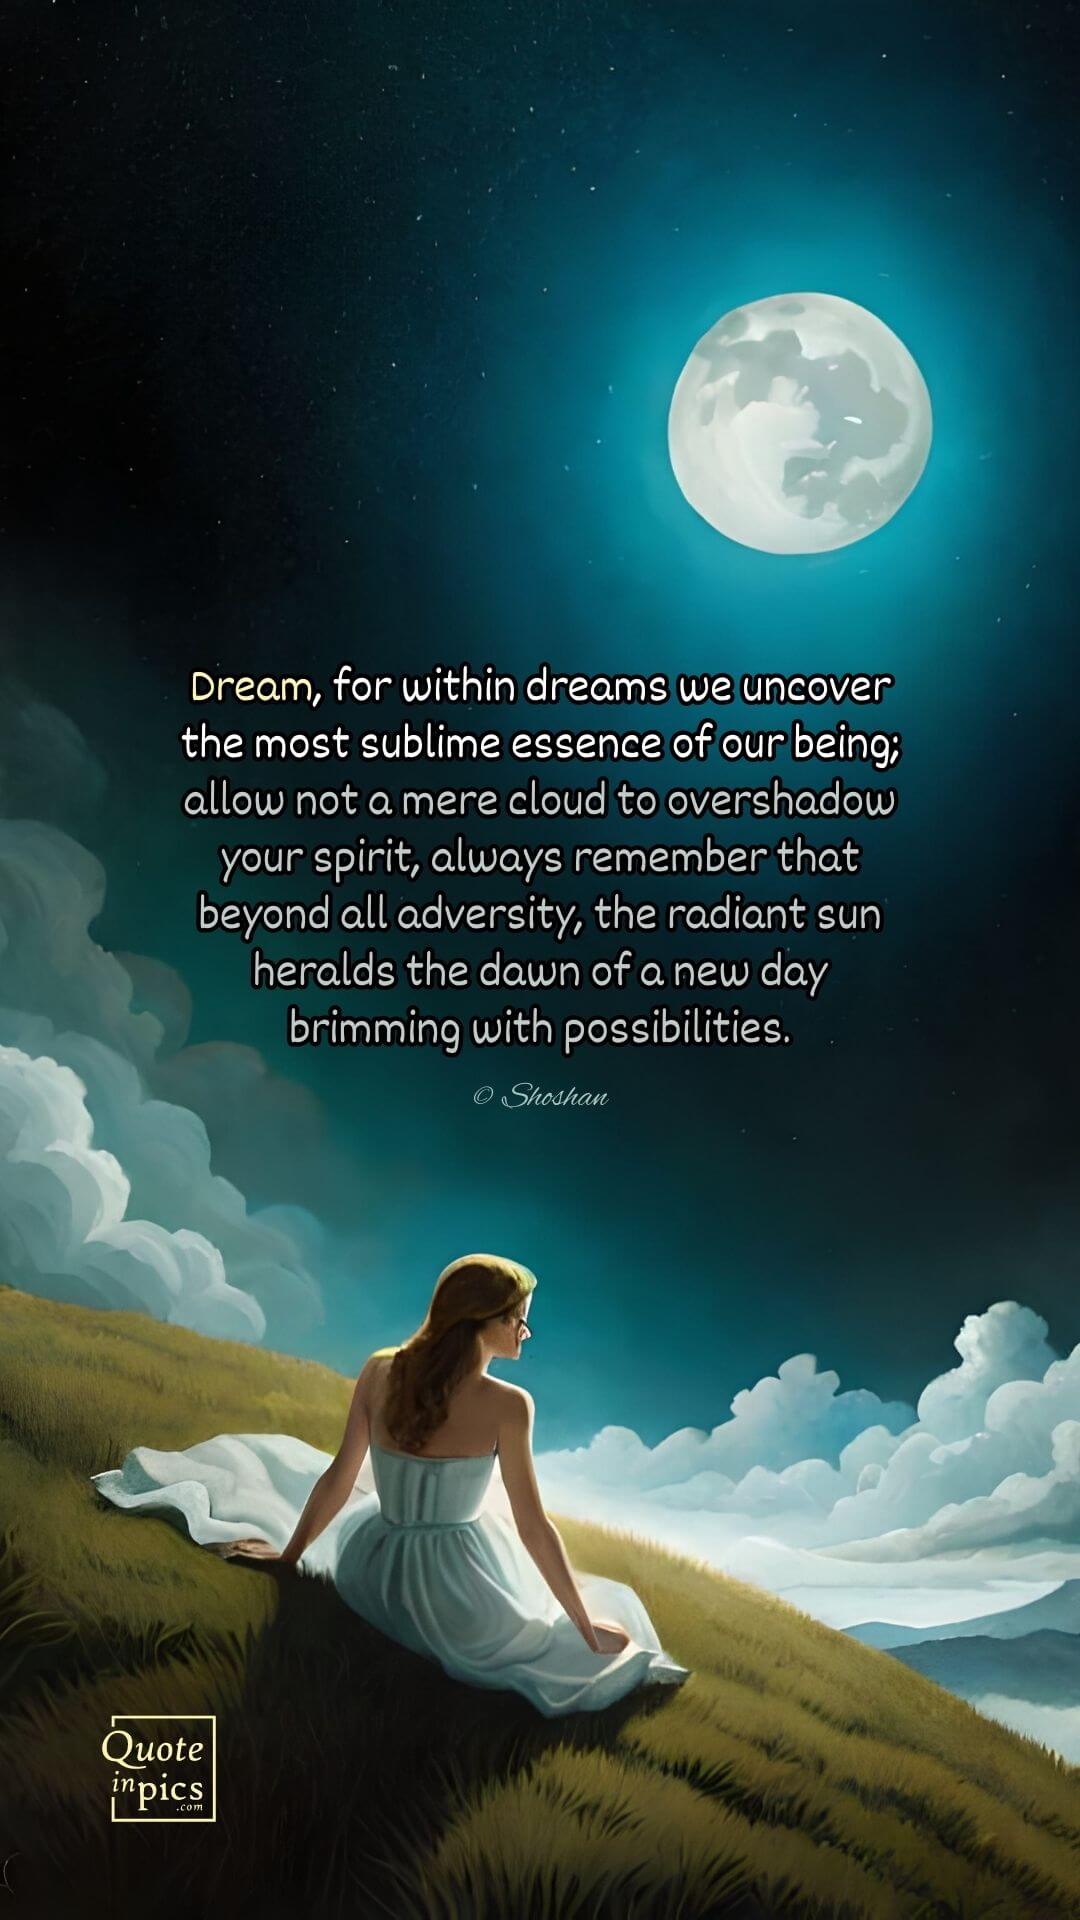 Dream, for within dreams we uncover the most sublime essence of our being